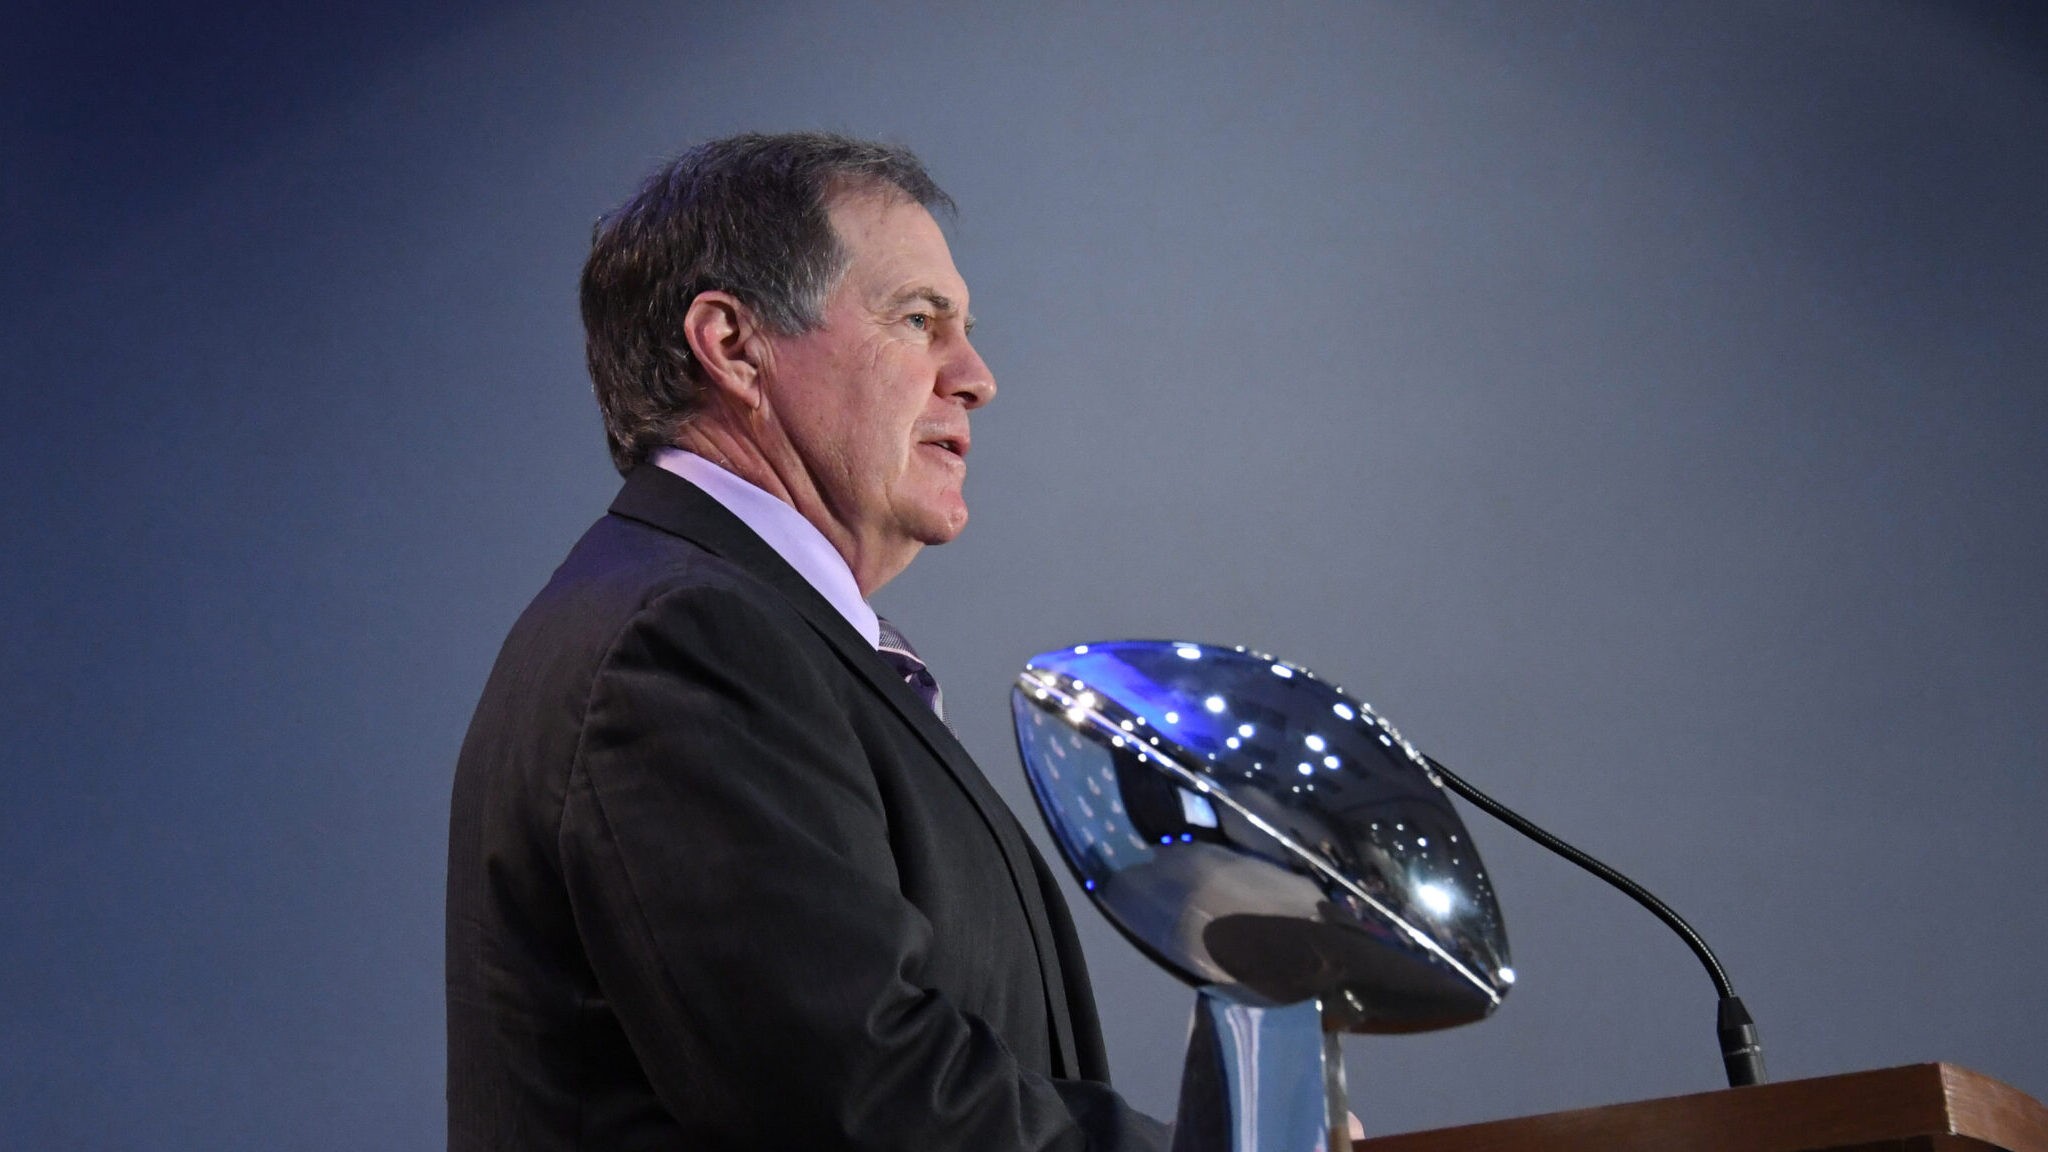 Bill Belichick stands at a podium with the Super Bowl trophy in the shot.